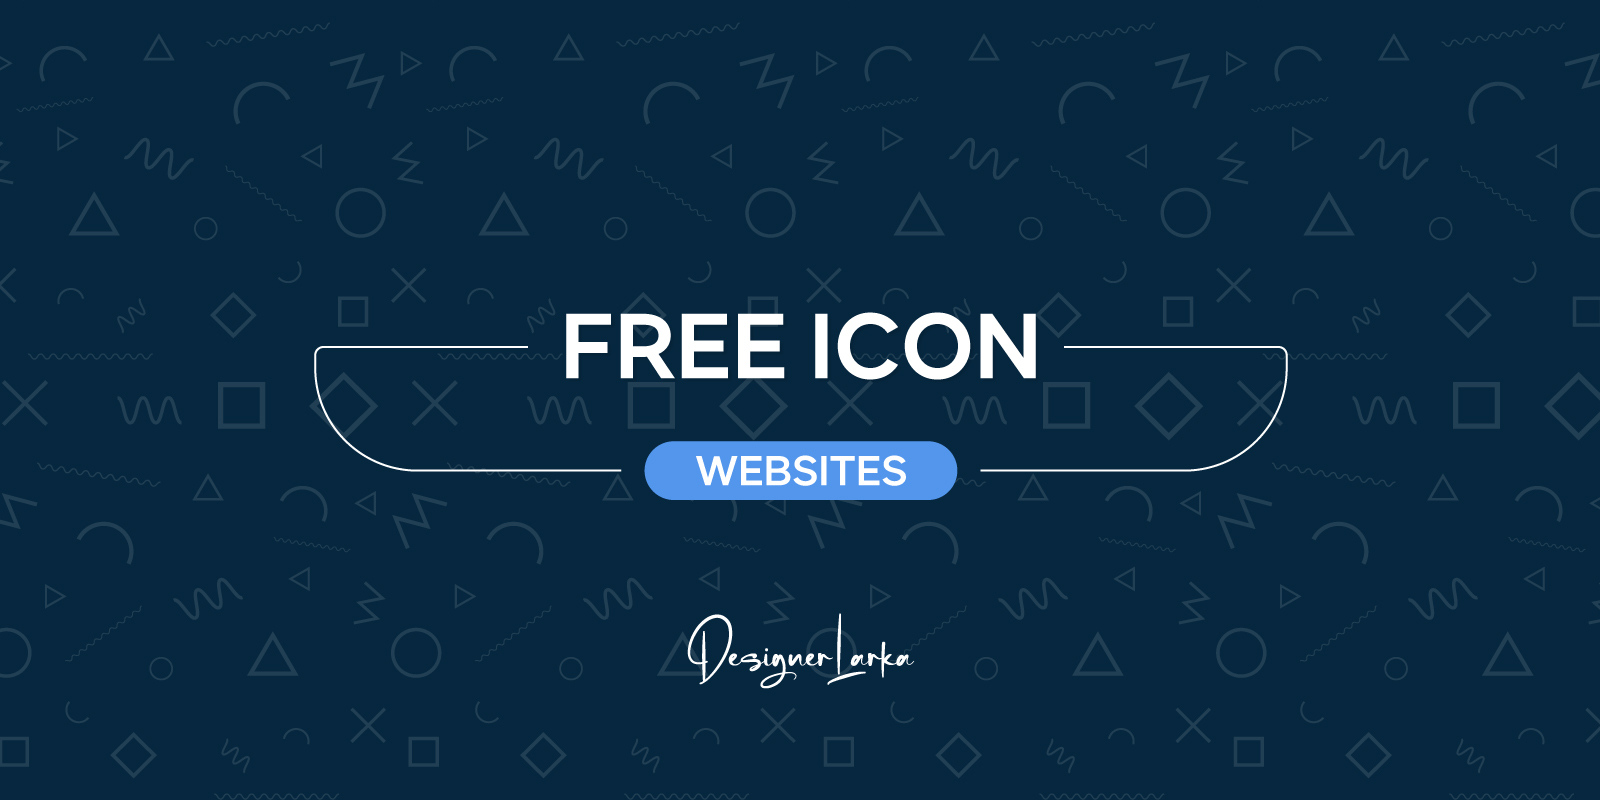 Top Free Icon Sites for Designers